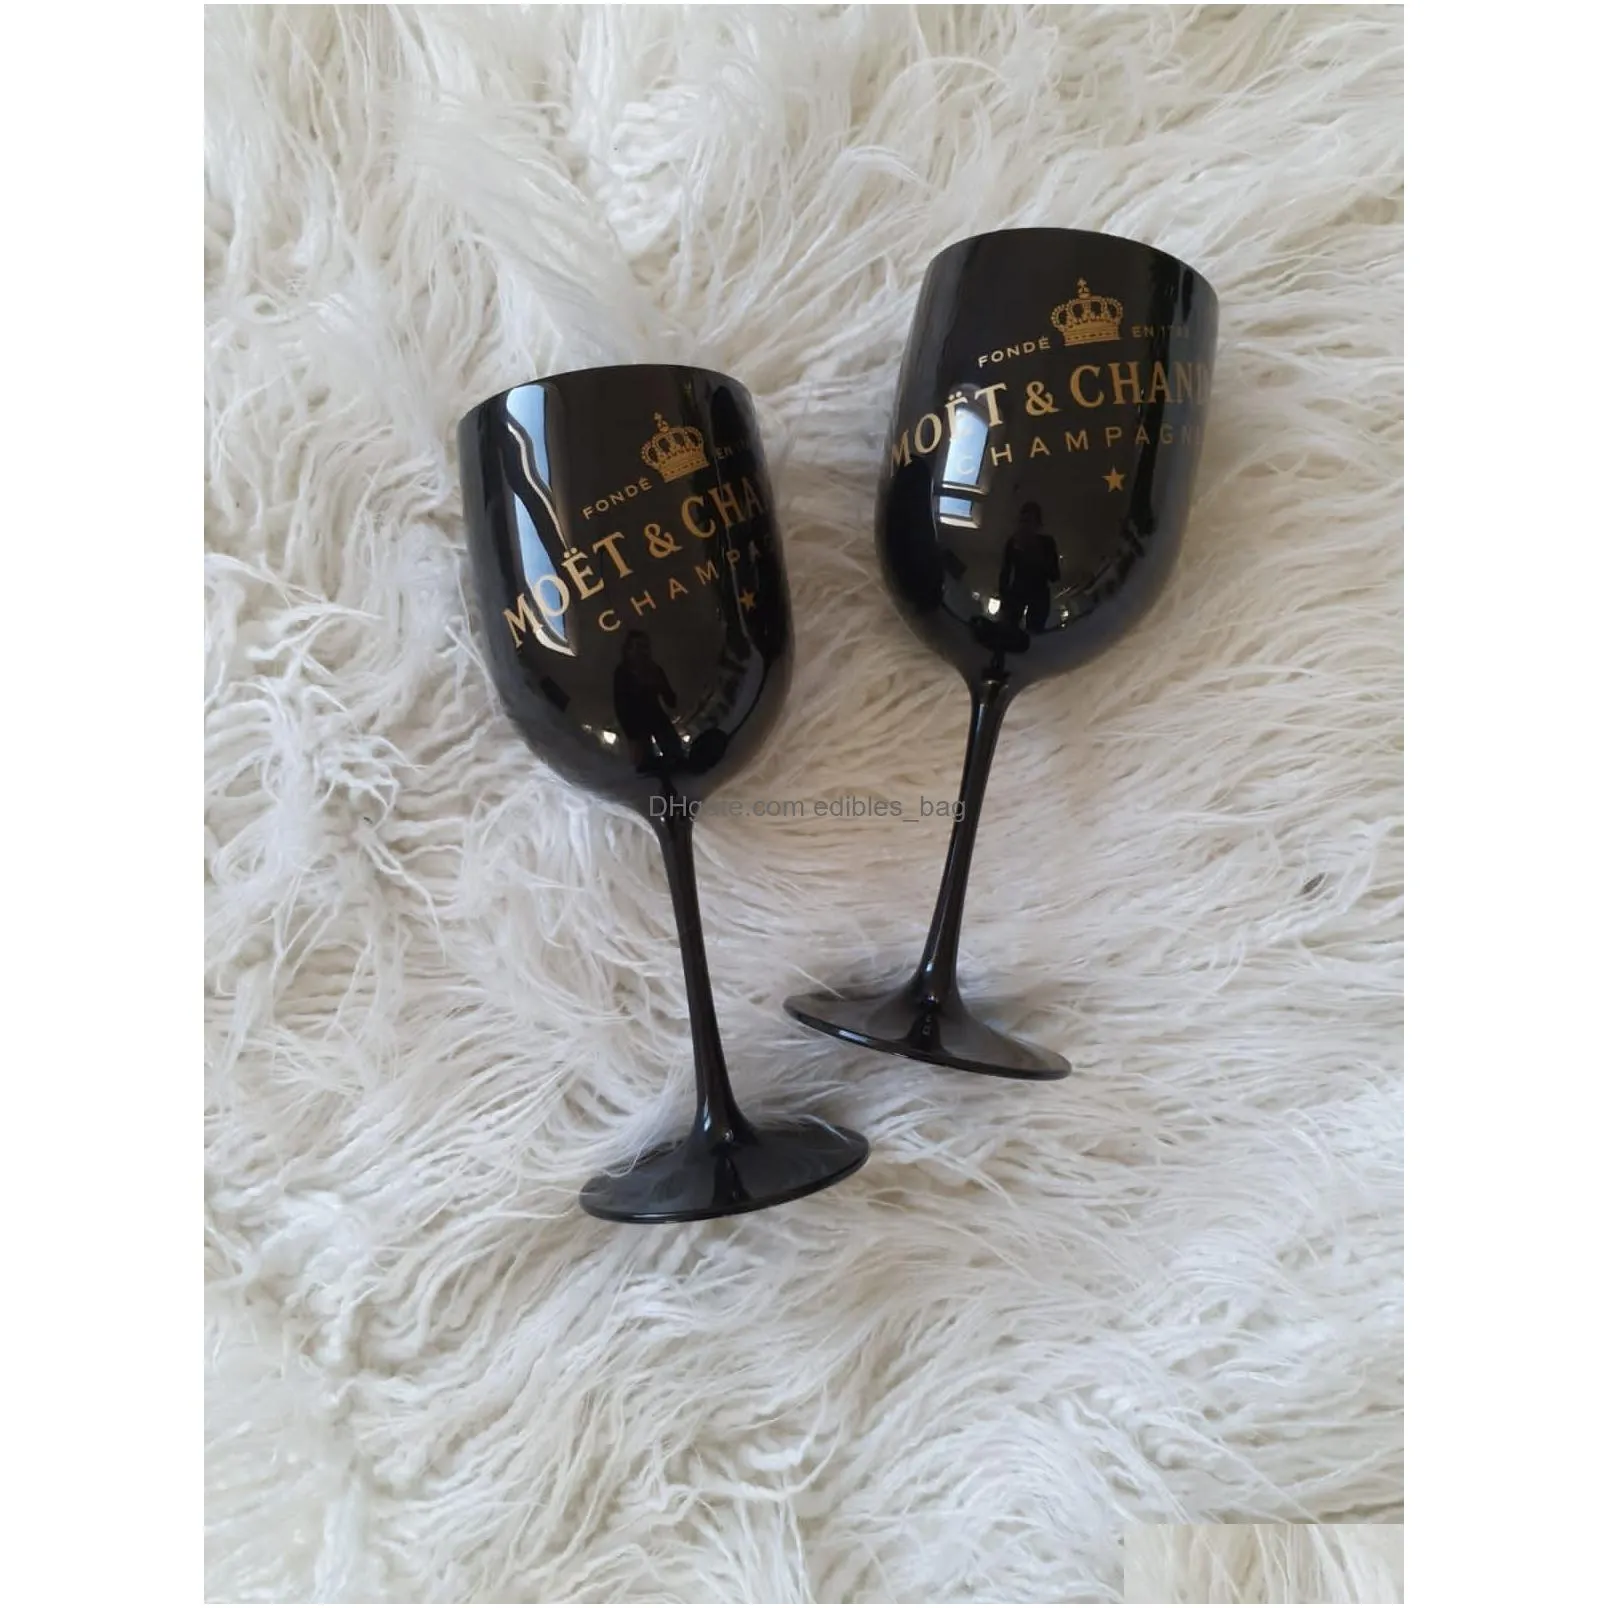 2 x champagne party wedding glasses drinkware drink wine cup electroplated cups cocktails goblet